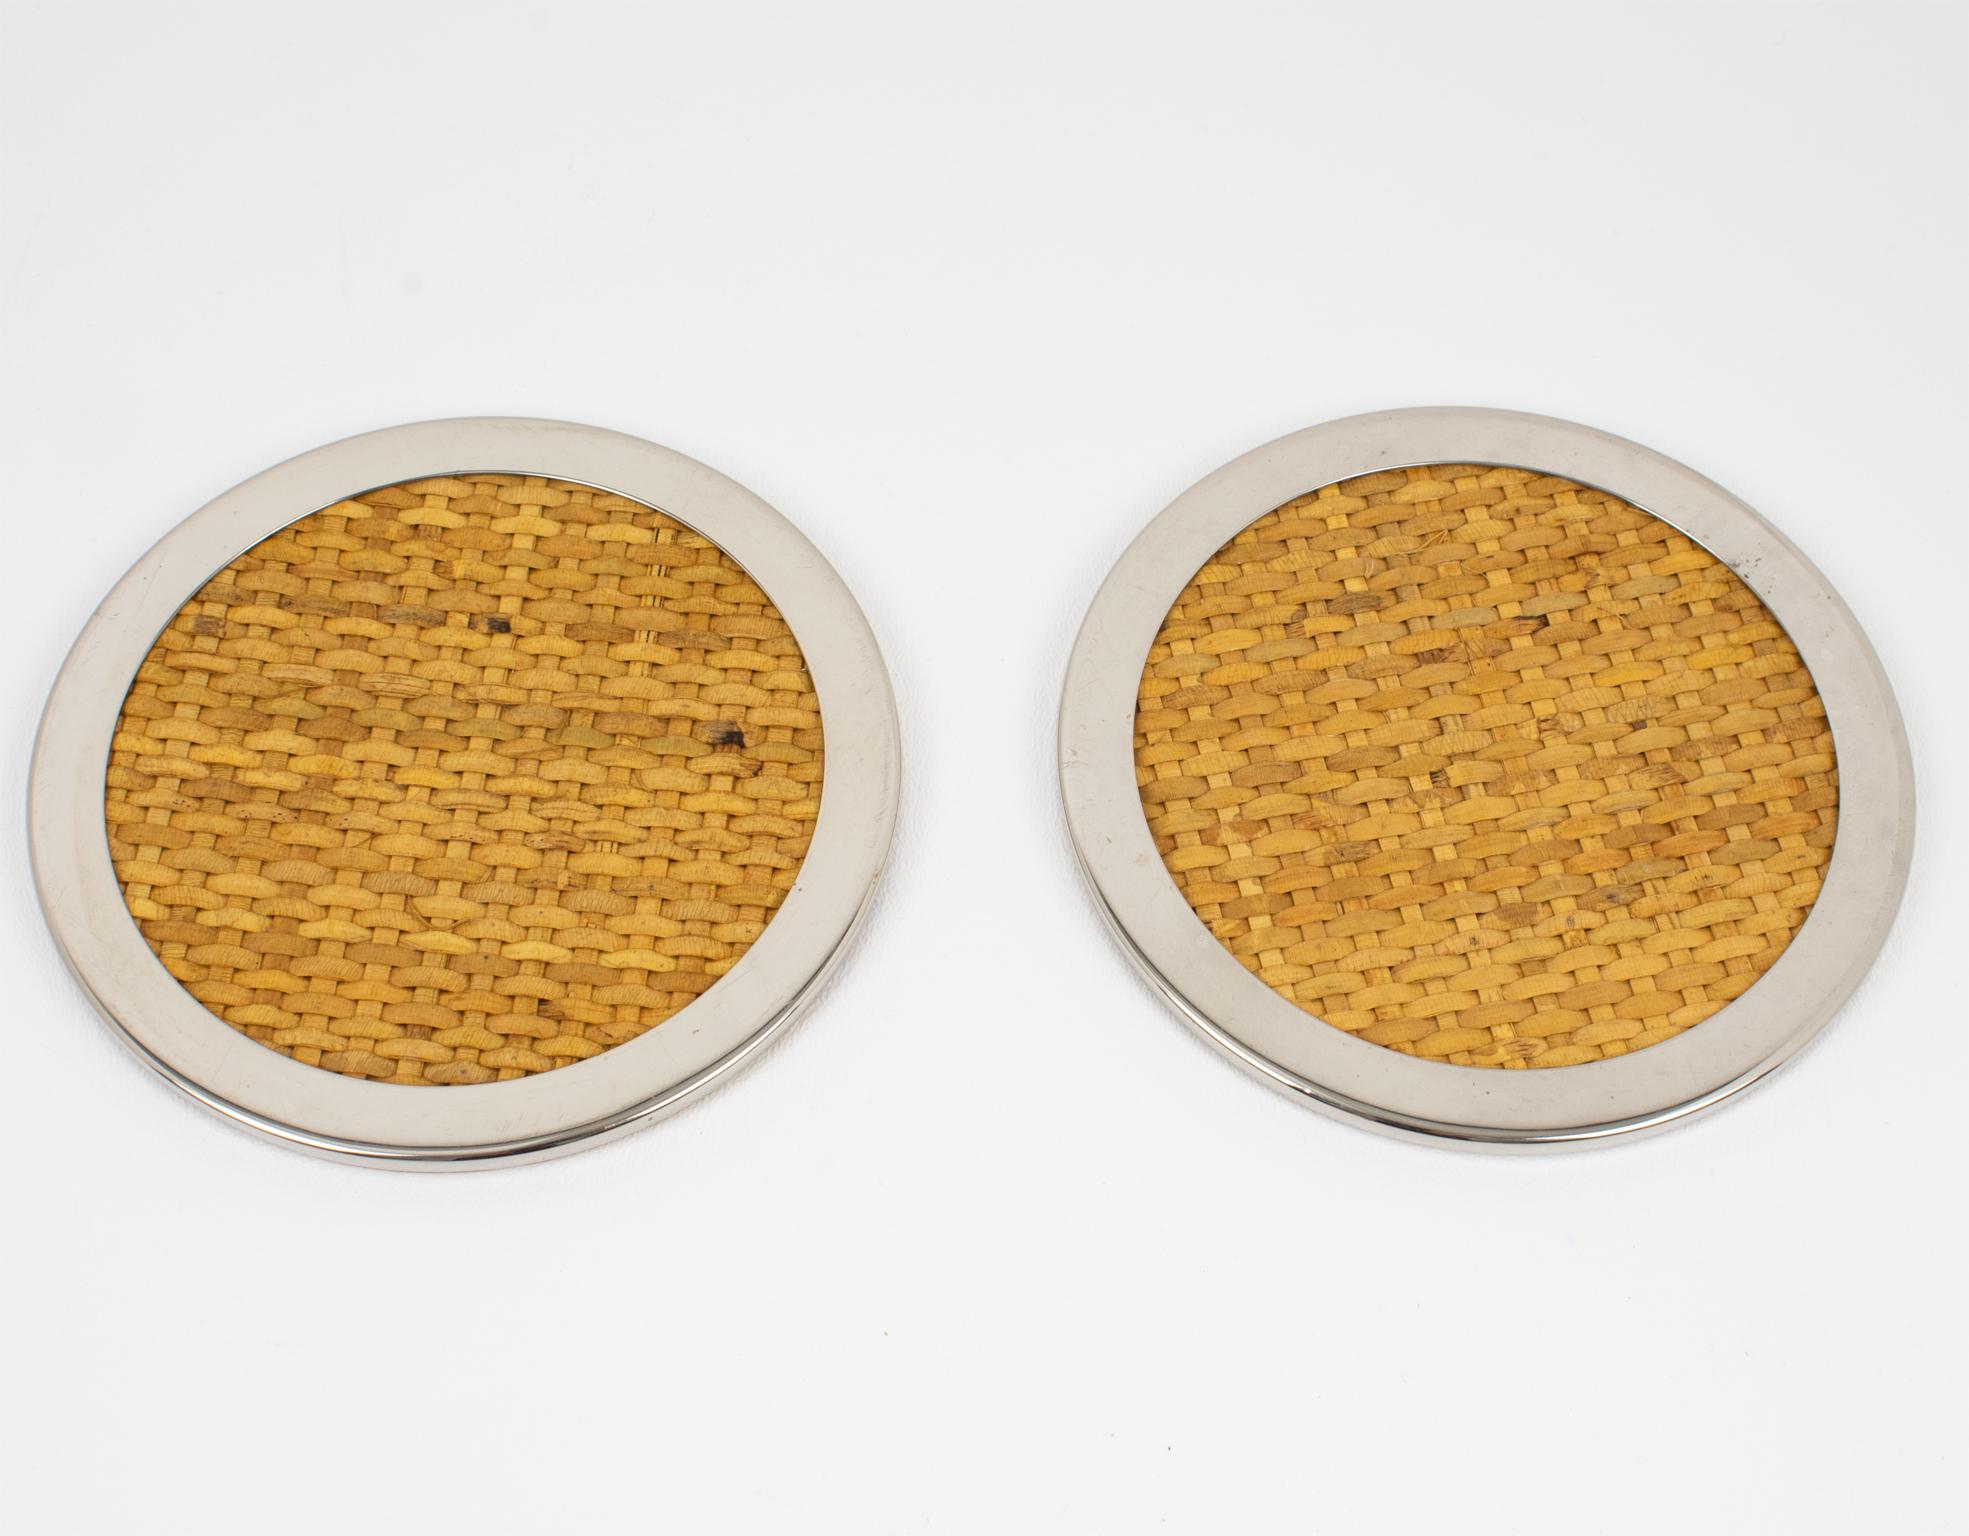 Tommaso Barbi crafted this lovely Mid-Century modernist barware set of two coasters in Italy in the 1970s. The rounded shape boasts a chromed metal stepped framing complemented by braided genuine wicker, rattan, or bamboo. The bottom side has been